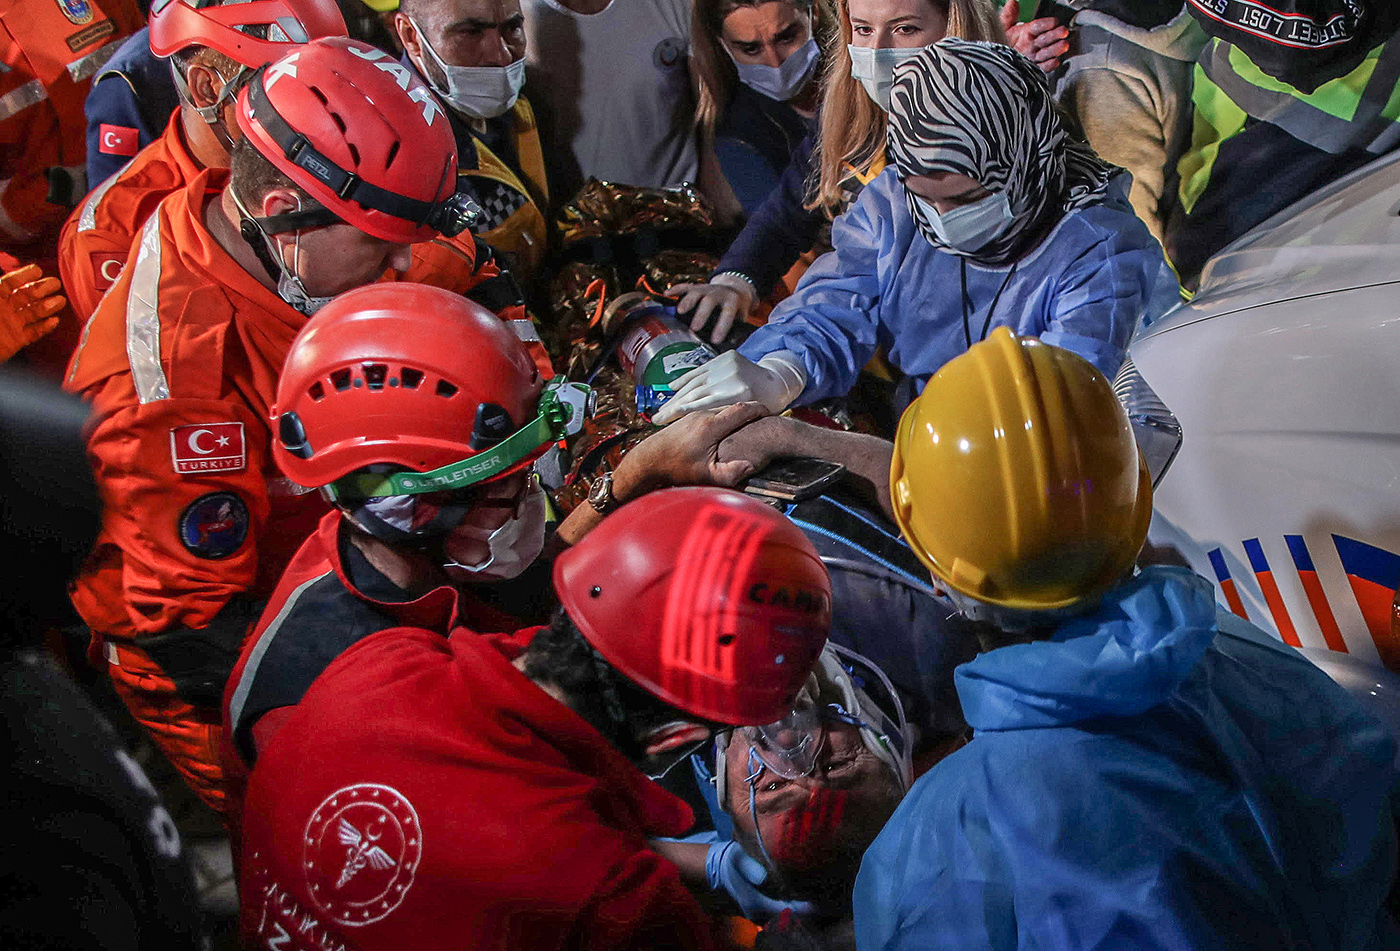 Rescue workers and people carry a wounded person who was rescued from a collapsed building after a 7.0 magnitude earthquake in the Aegean Sea, at Bayrakli district  in Izmir, Turkey, 30 October 2020. According to Turkish media reports, at least twelve people died while more than six hundreds were injured and dozens of buildings were destroyed in the earthquake.  EPA-EFE/ERDEM SAHIN